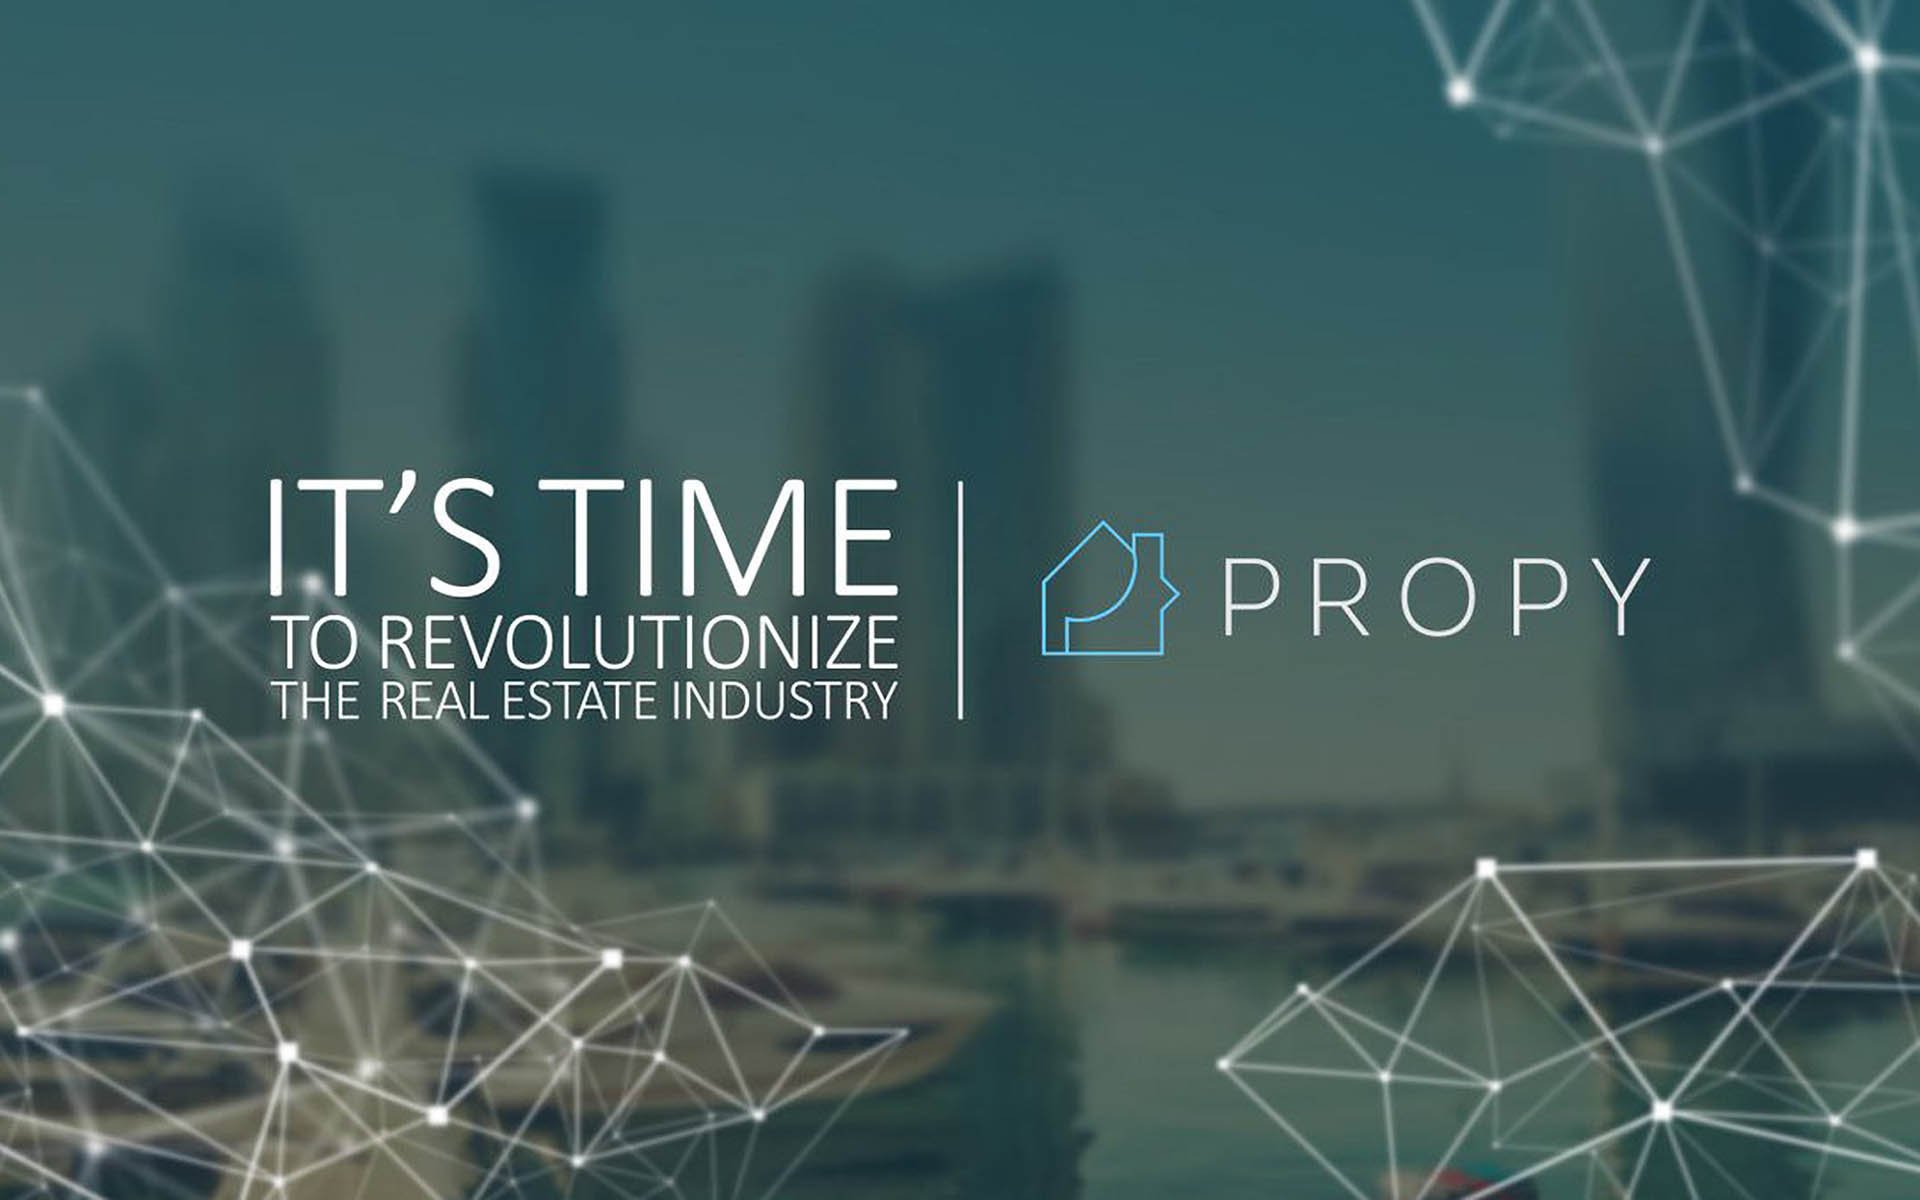 Propy Resumes its ICO Campaign After Ambisafe Developer Resolves Parity Hack, Saves Millions